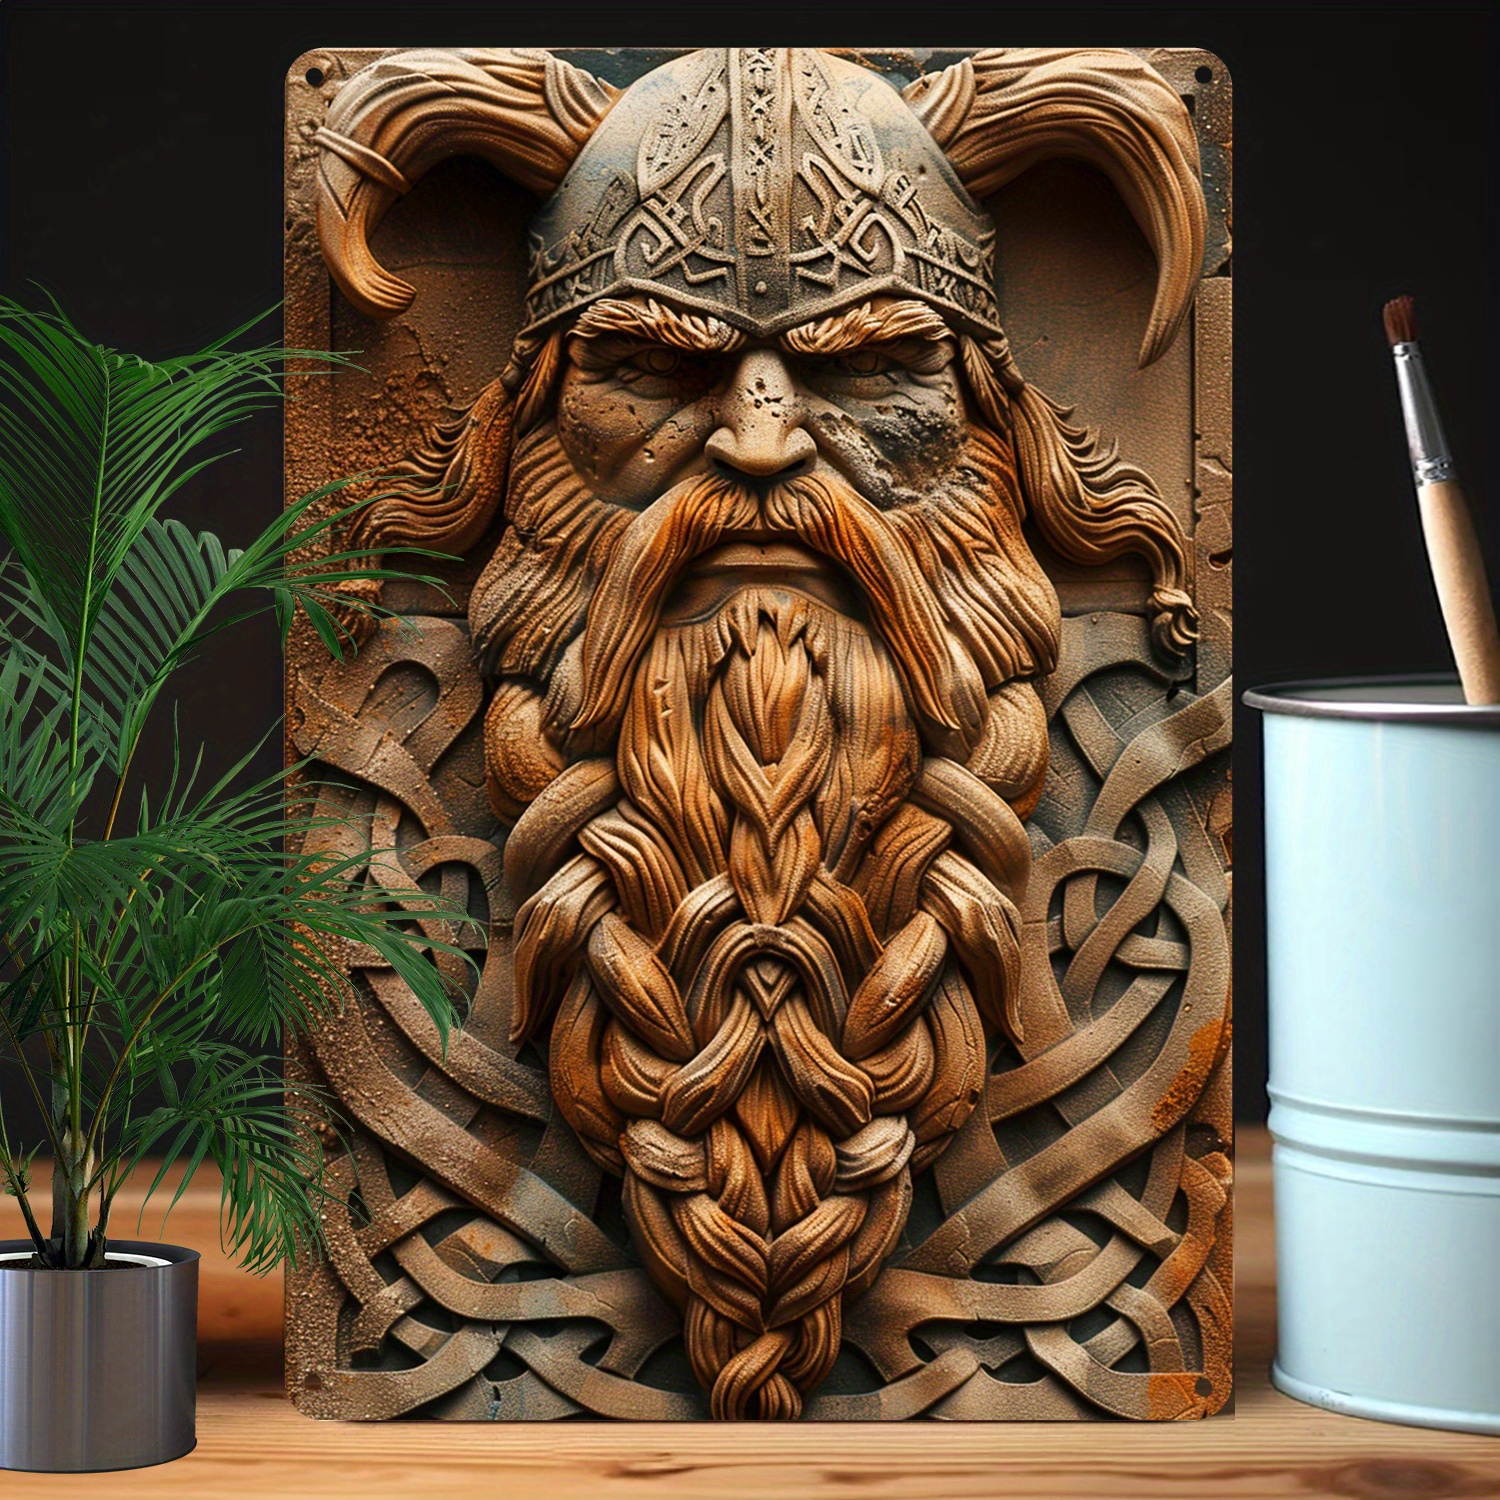 

Viking Warrior 3d Decal - 100% Aluminum Material - 32% Higher Bending Resistance - 8x12 Inch (20x30cm) - Perfect For Bedroom, Livingroom, Office, Kitchen, Studio, Classroom, And More - A3161